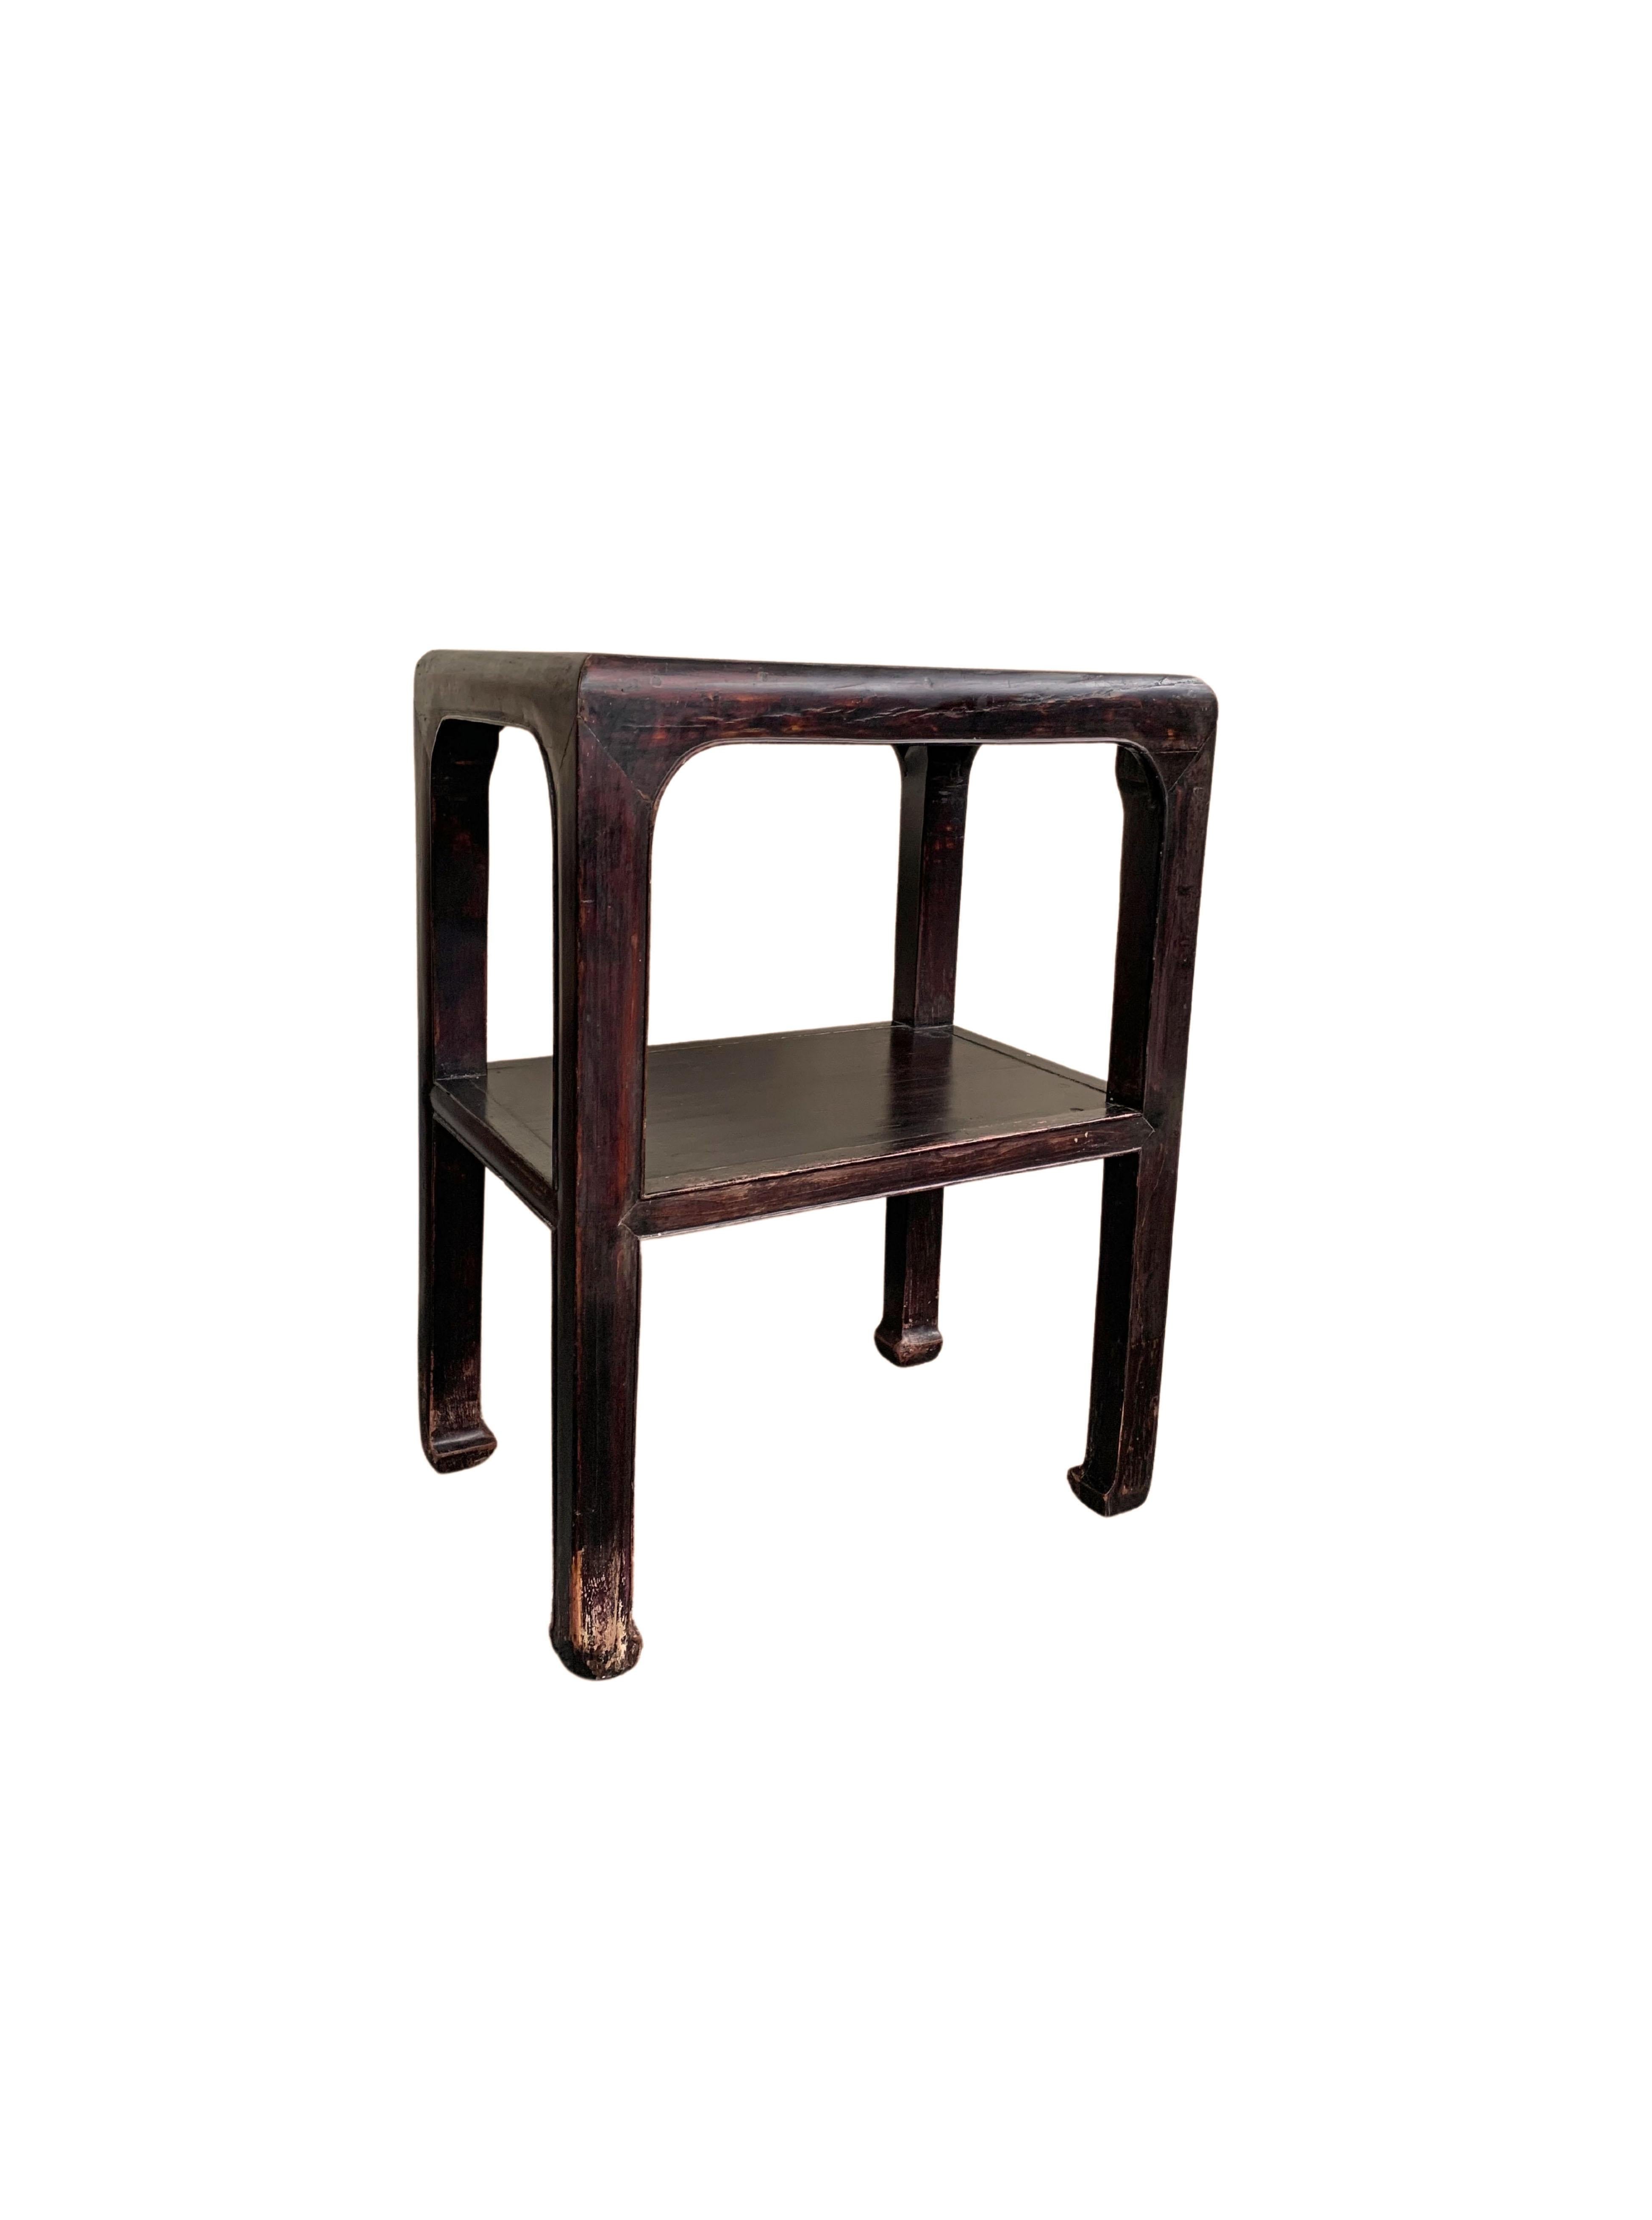 Chinese Export Chinese Lacquered Wooden Table with Curved Legs, c. 1950 For Sale